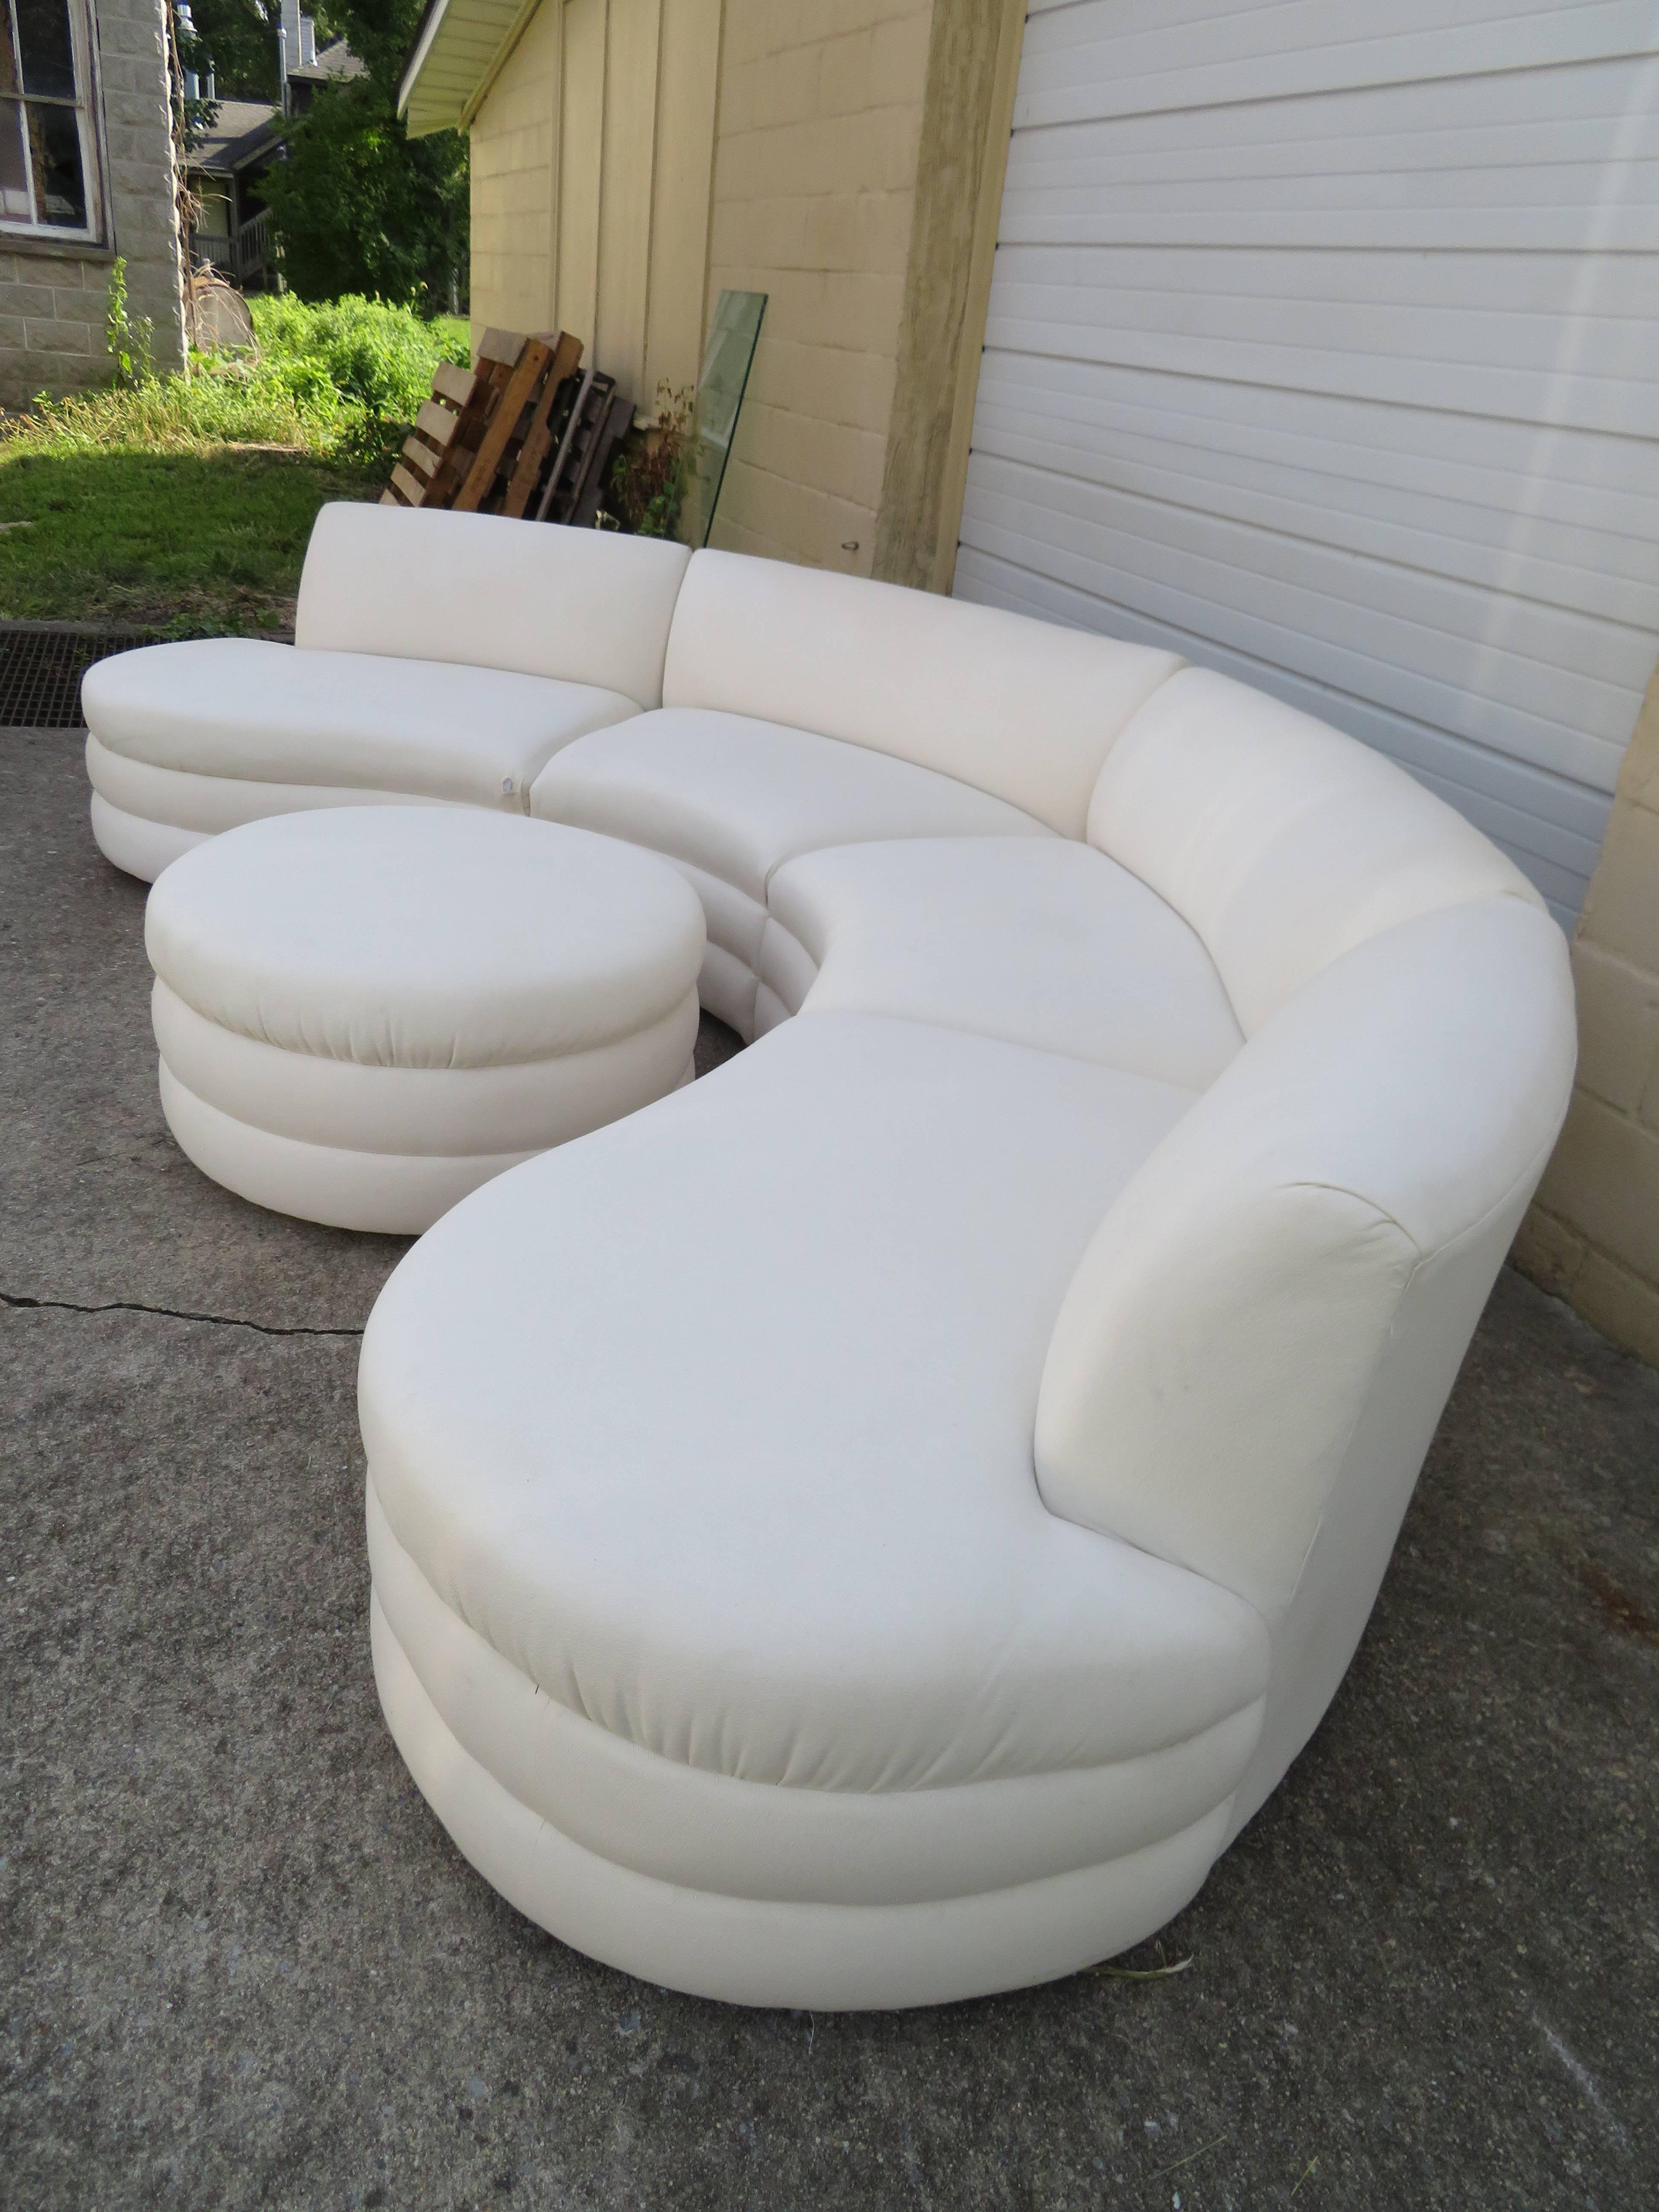 Fabulous five-piece curved sectional sofa attributed Directional with cool swivel ottoman. This sensational set will need to be reupholstered but that's what you designers are looking for any way-right? Just imagine this done in a swanky blue iced